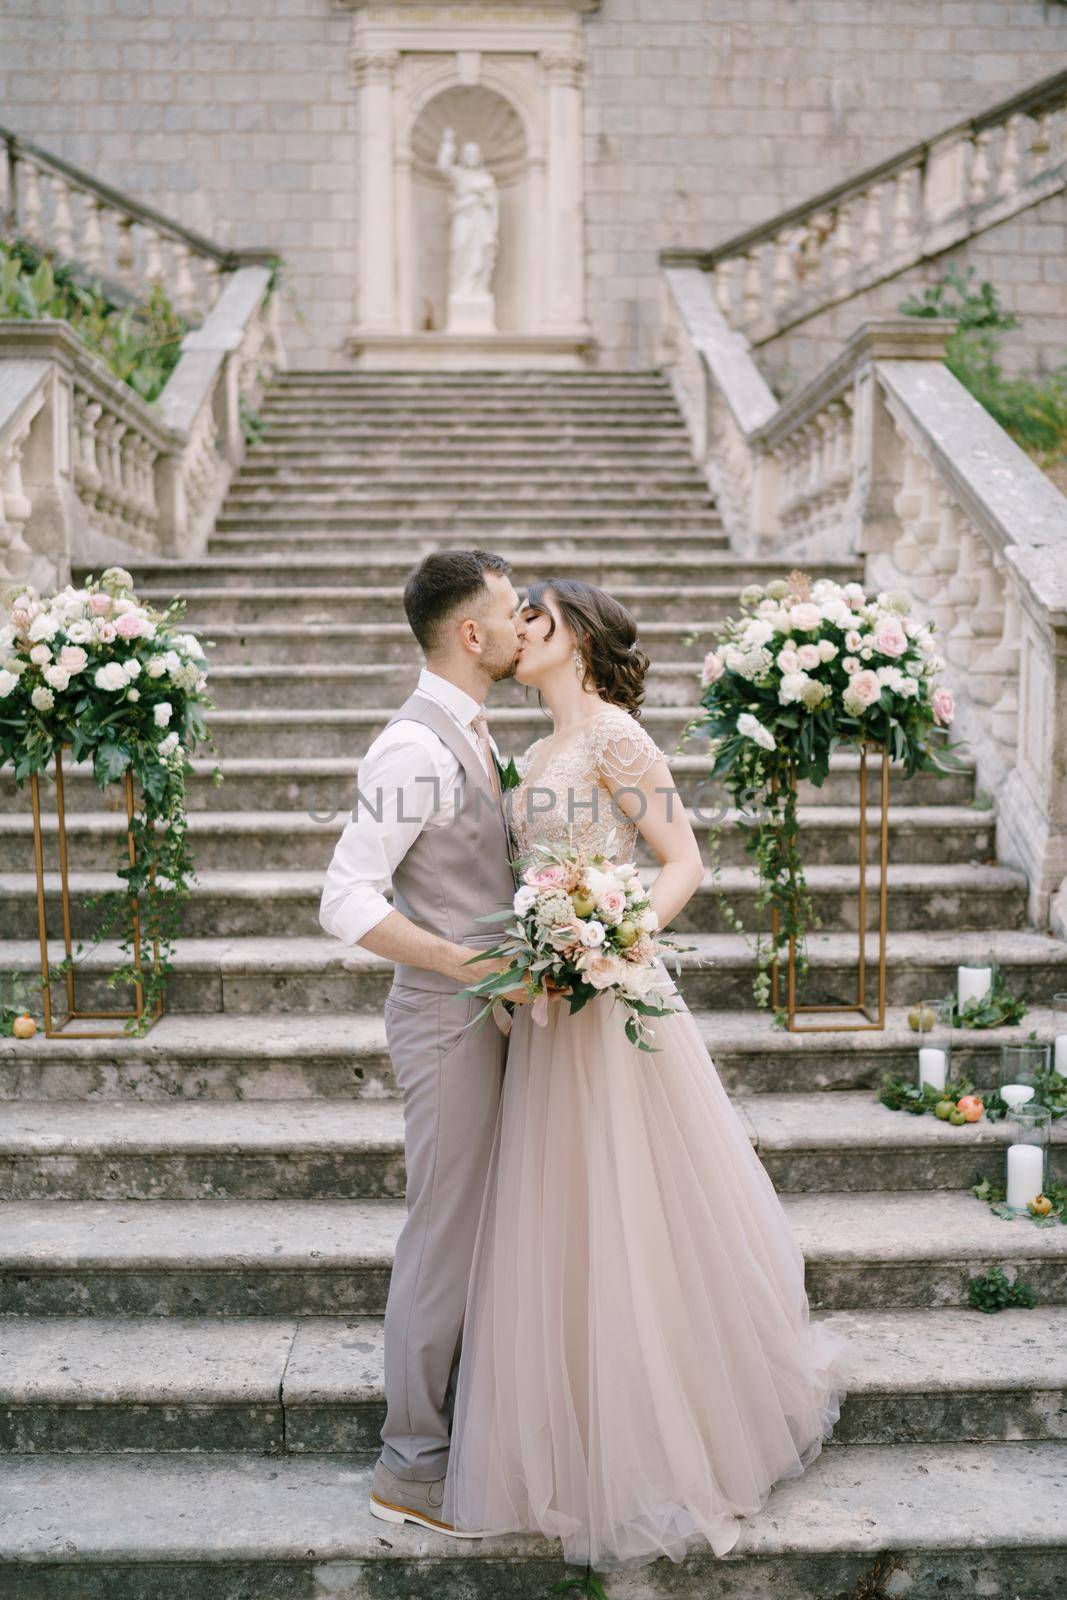 Groom kisses bride while standing on the stone steps near the old villa by Nadtochiy